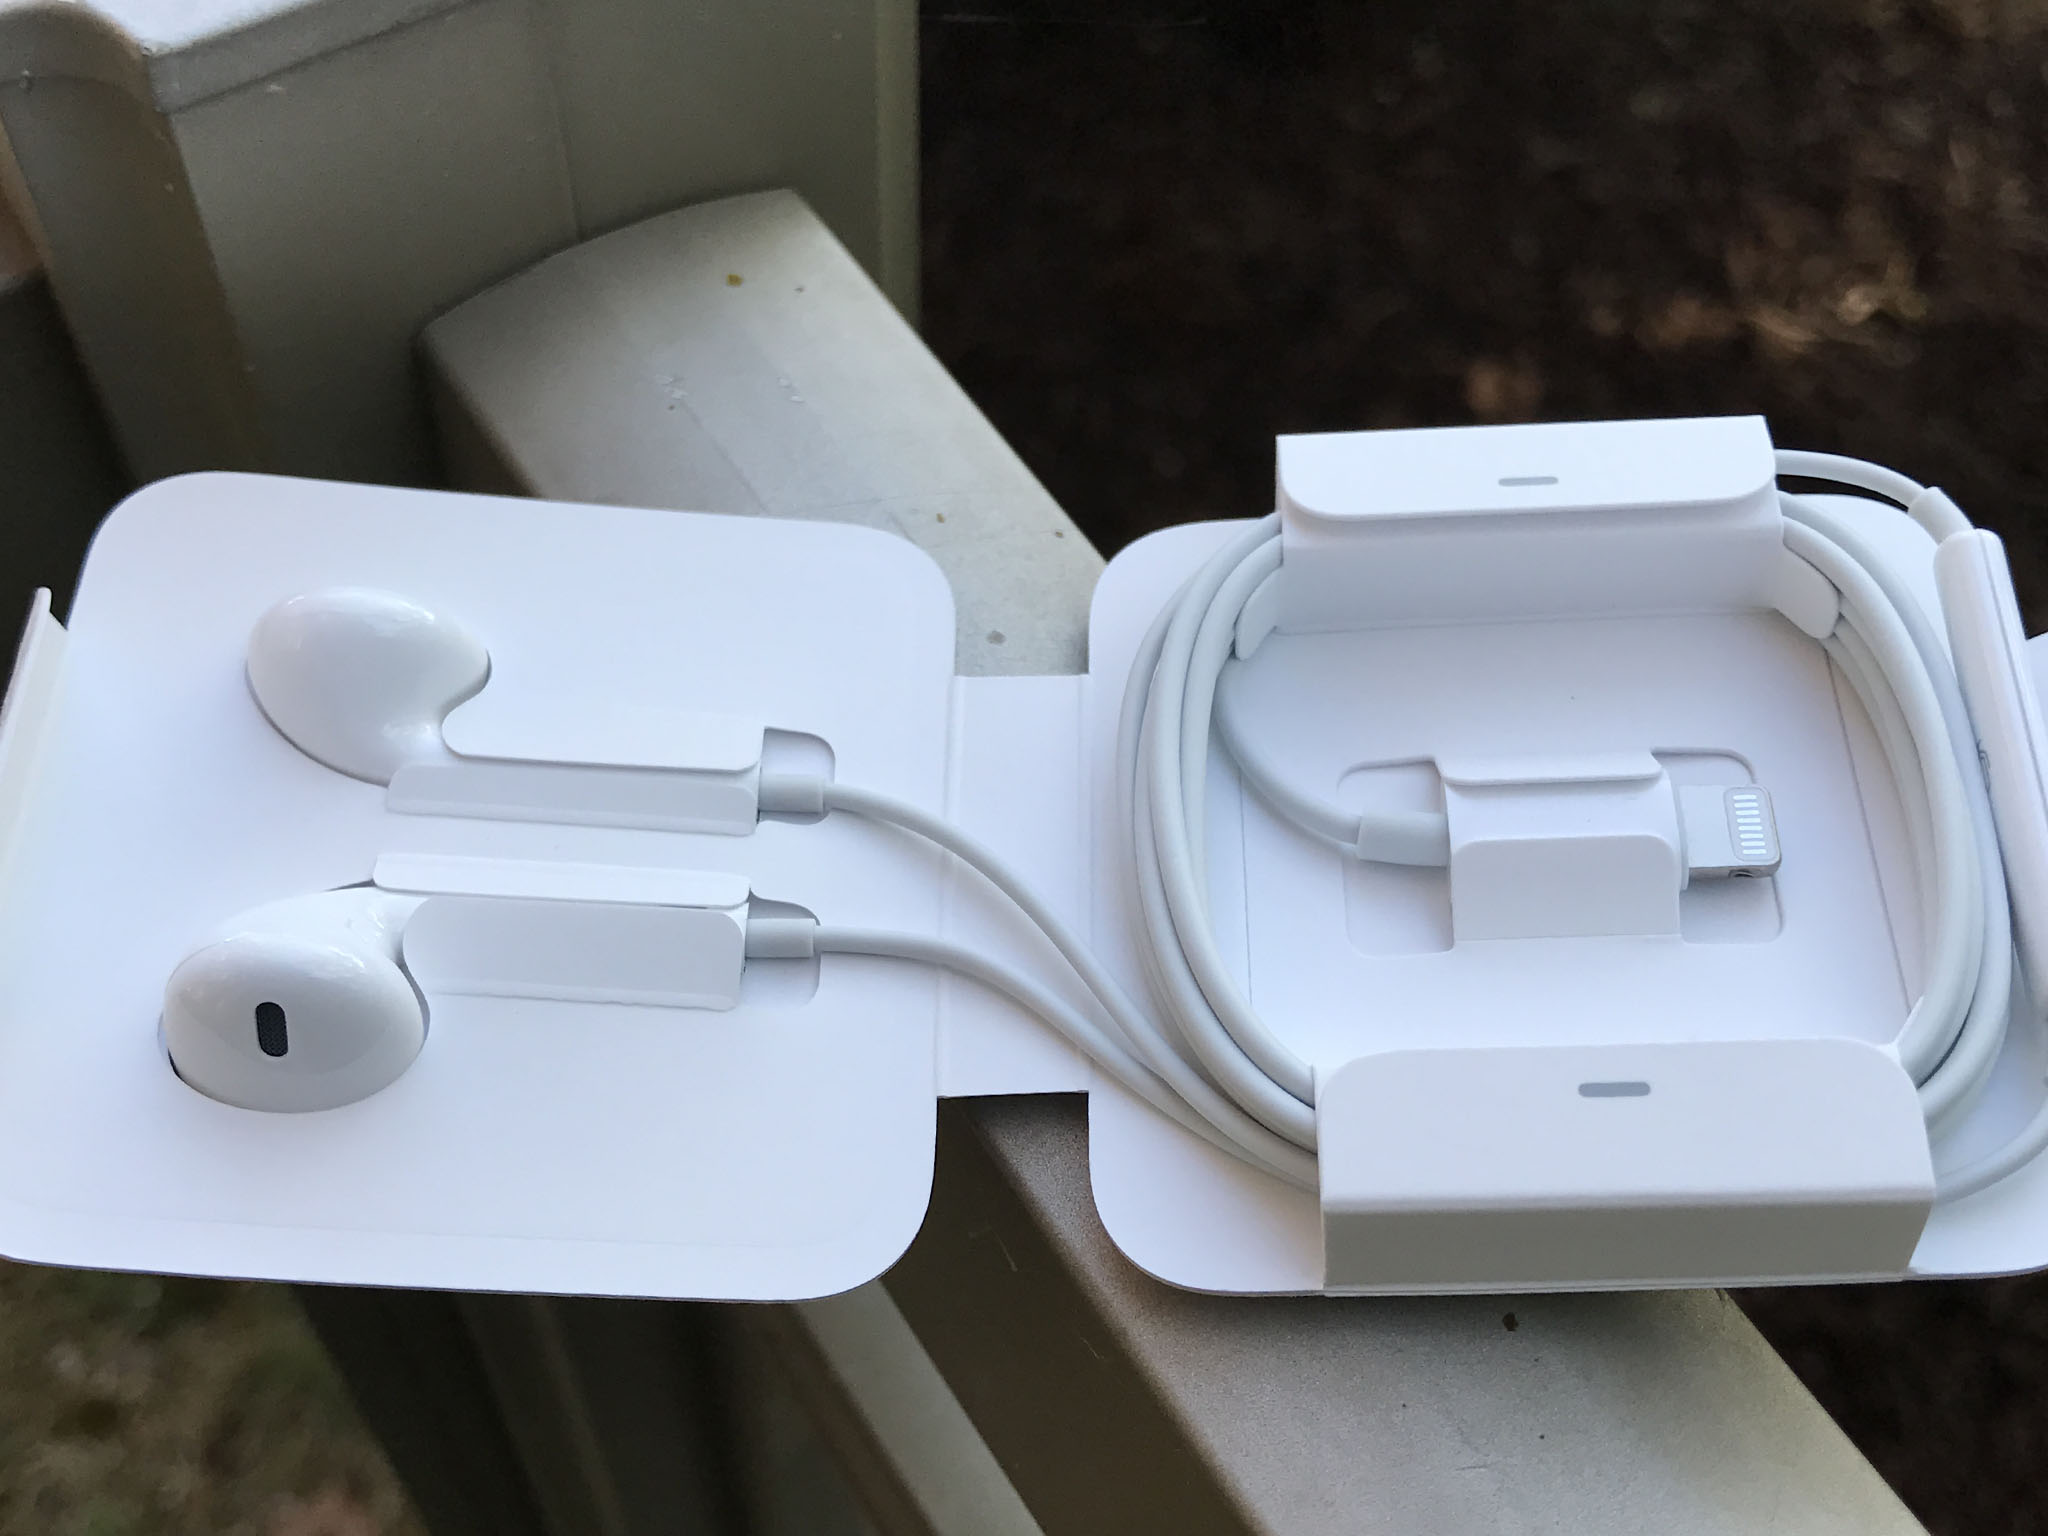 Apple is still bundling EarPods with new iPhones in France